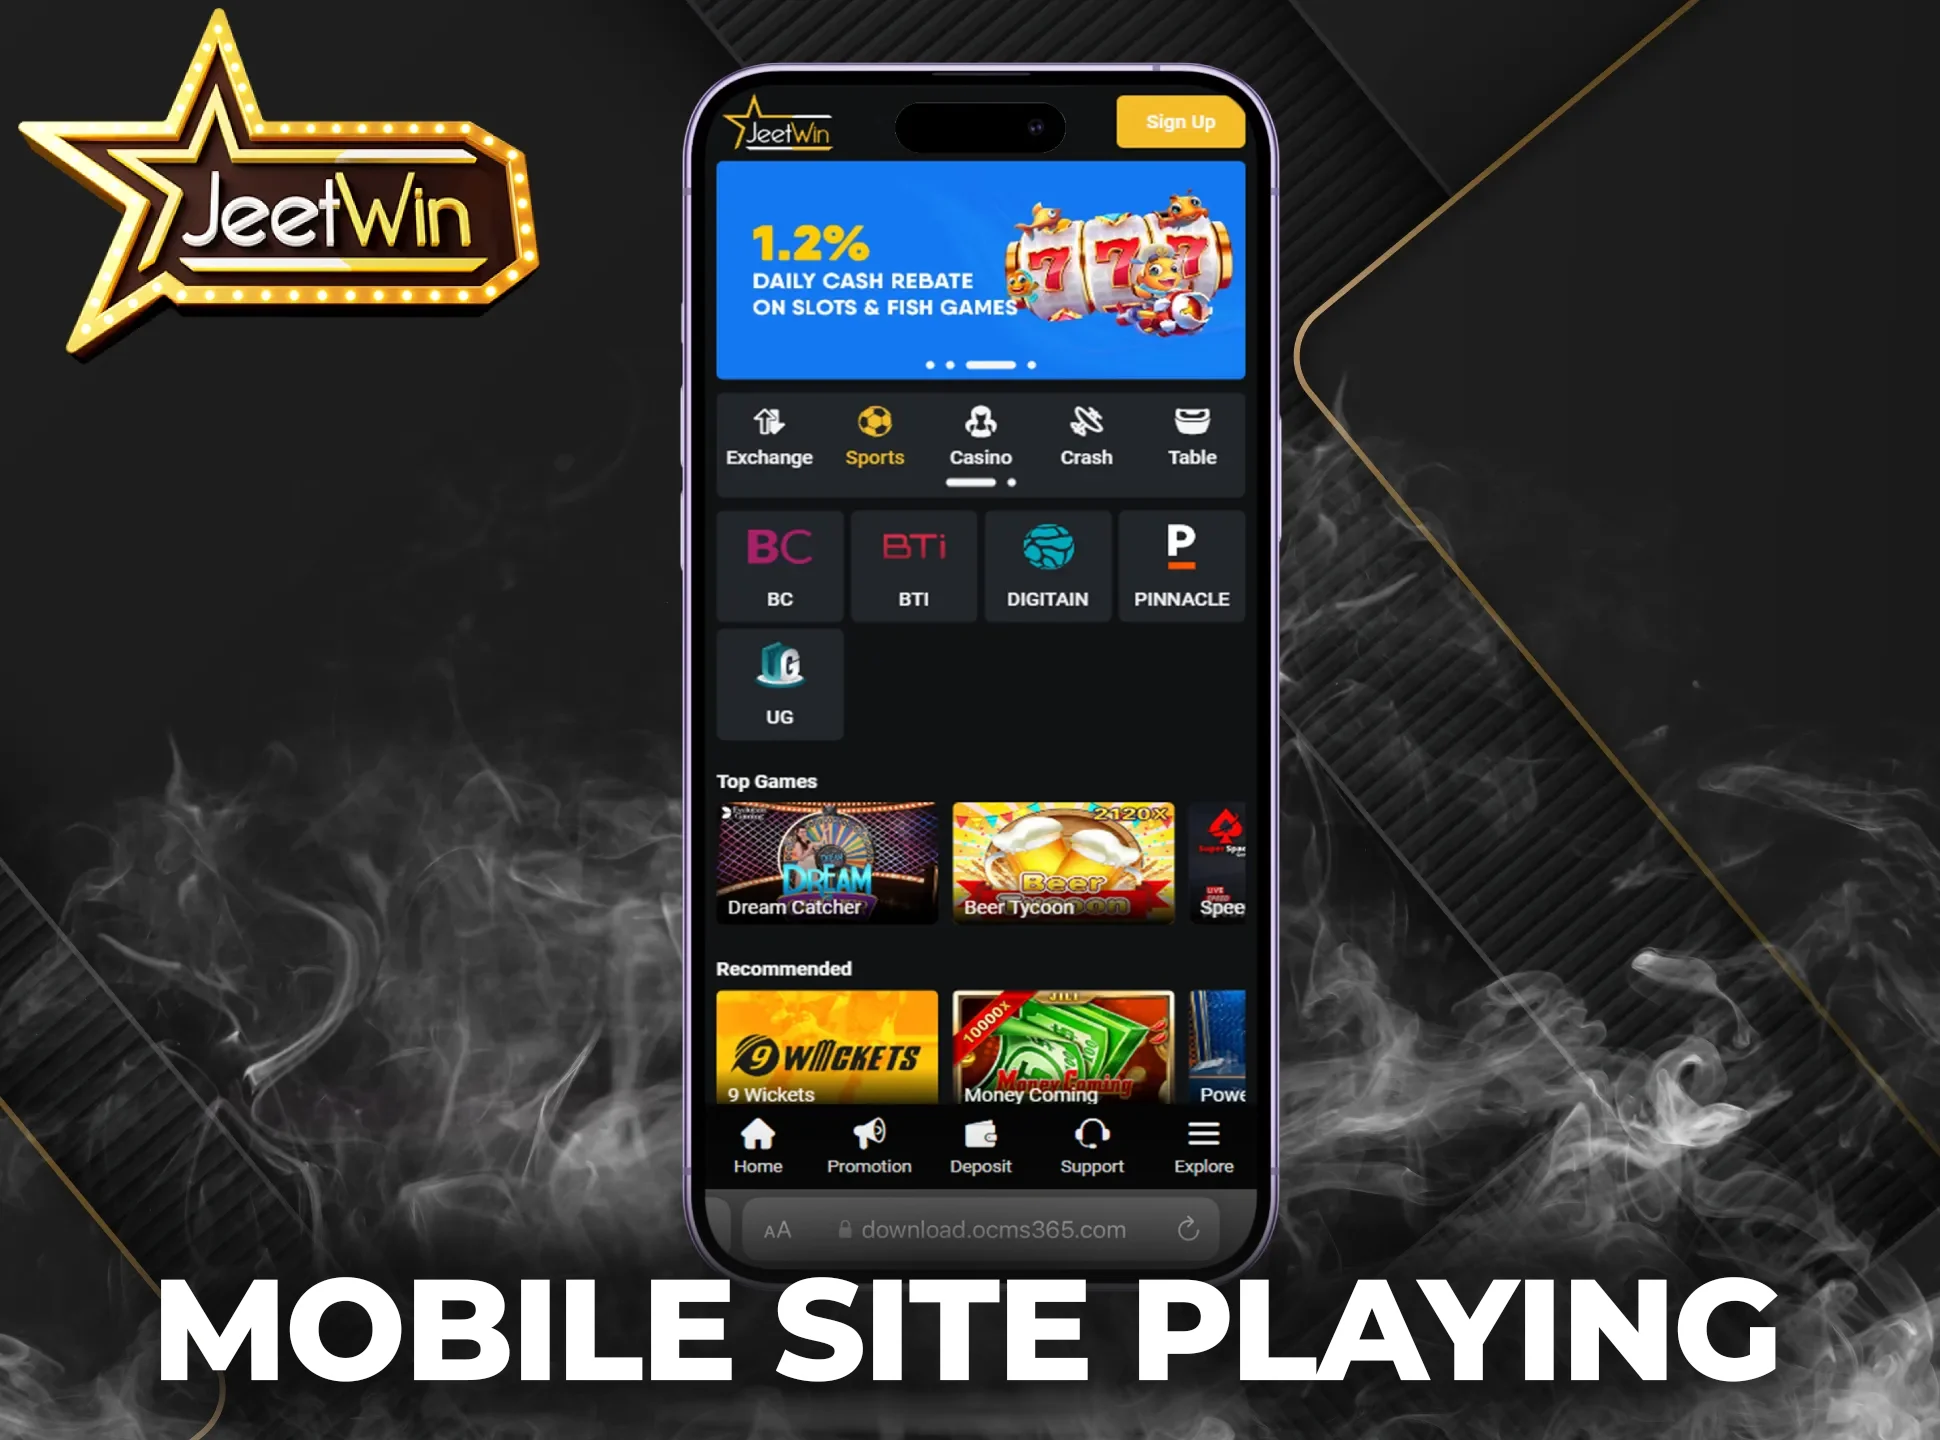 Players can use the mobile version of the JeetWin website.